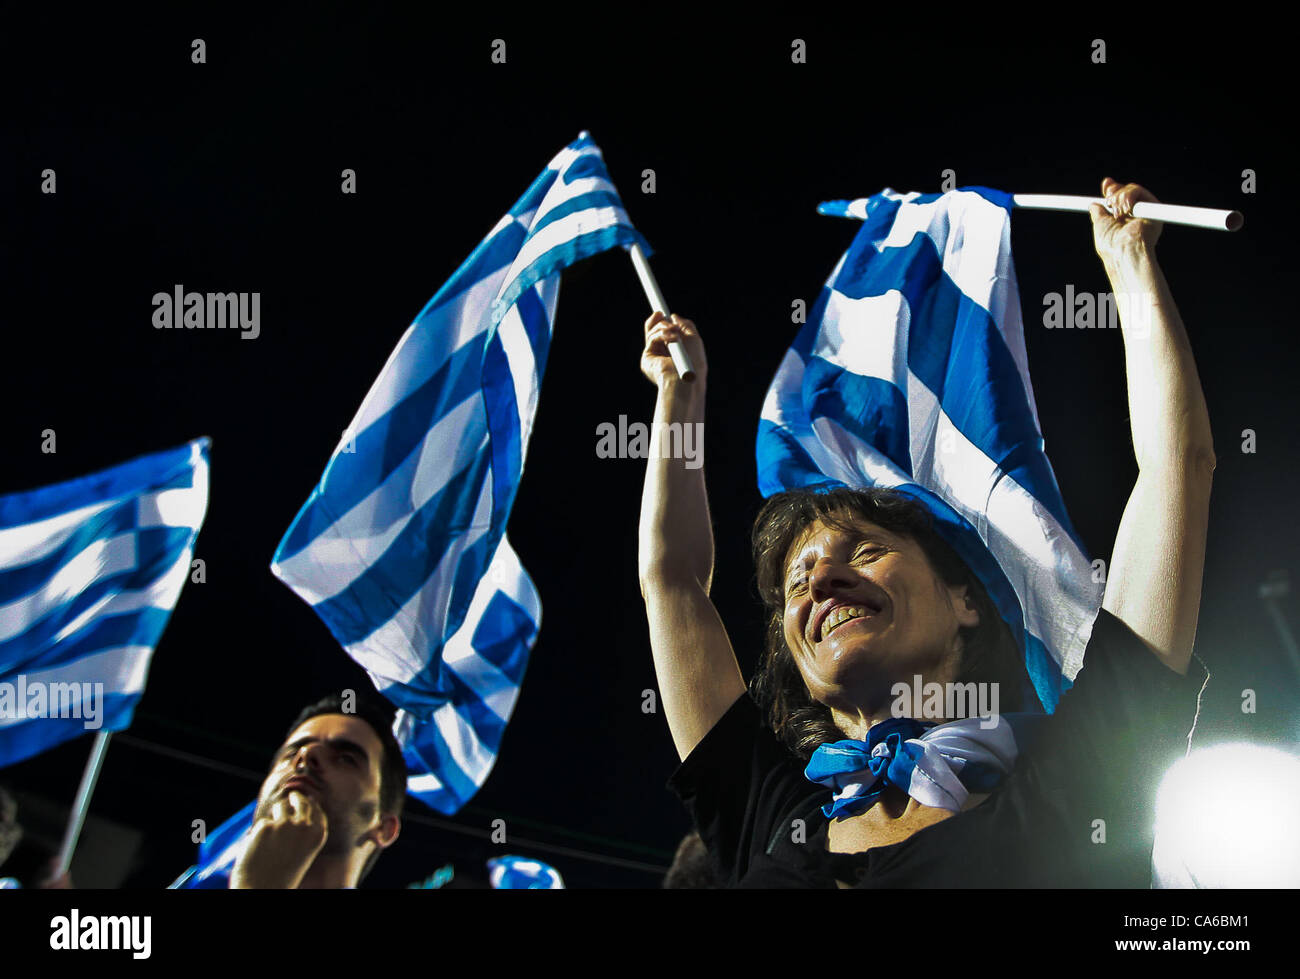 June 16, 2012 - Athens, Greece - Supporters of Antonis Samaras and the New Democracy party listen their leader's speech during the party's main pre-election rally in the central Athens Syntagma square on June 15, 2012. As Greece heads for a momentous electoral battle that could decide whether it sta Stock Photo